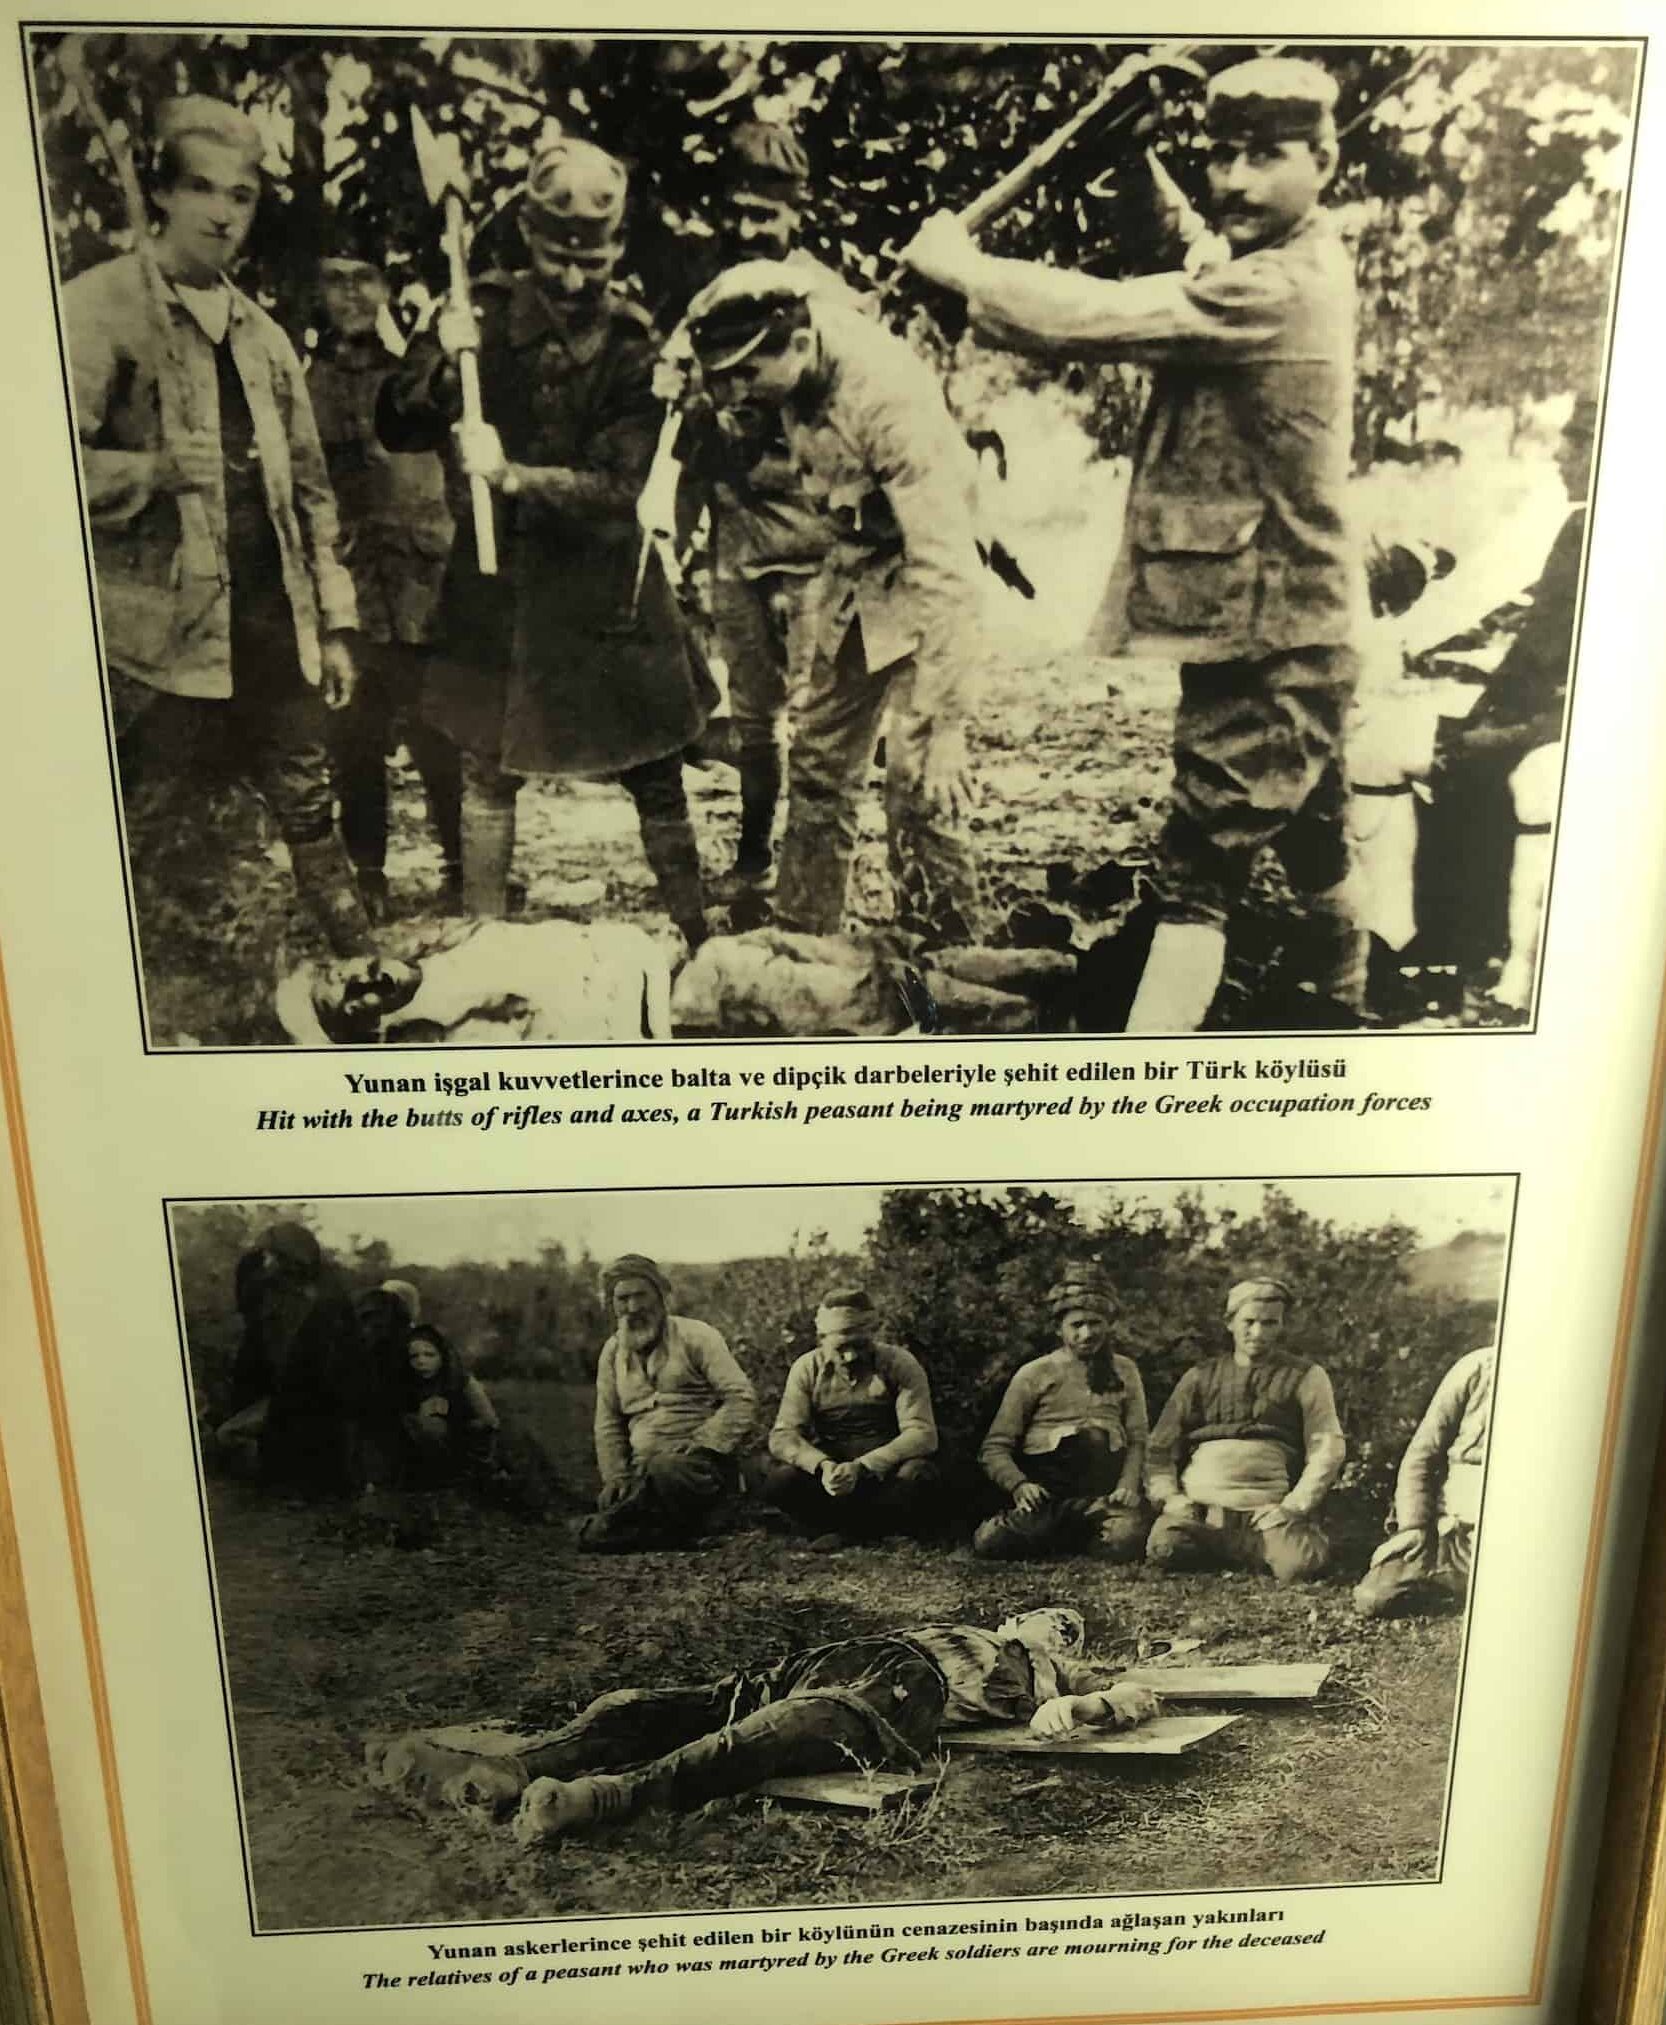 Photos of the victims of Greek soldiers at the Atatürk and War of Independence Museum